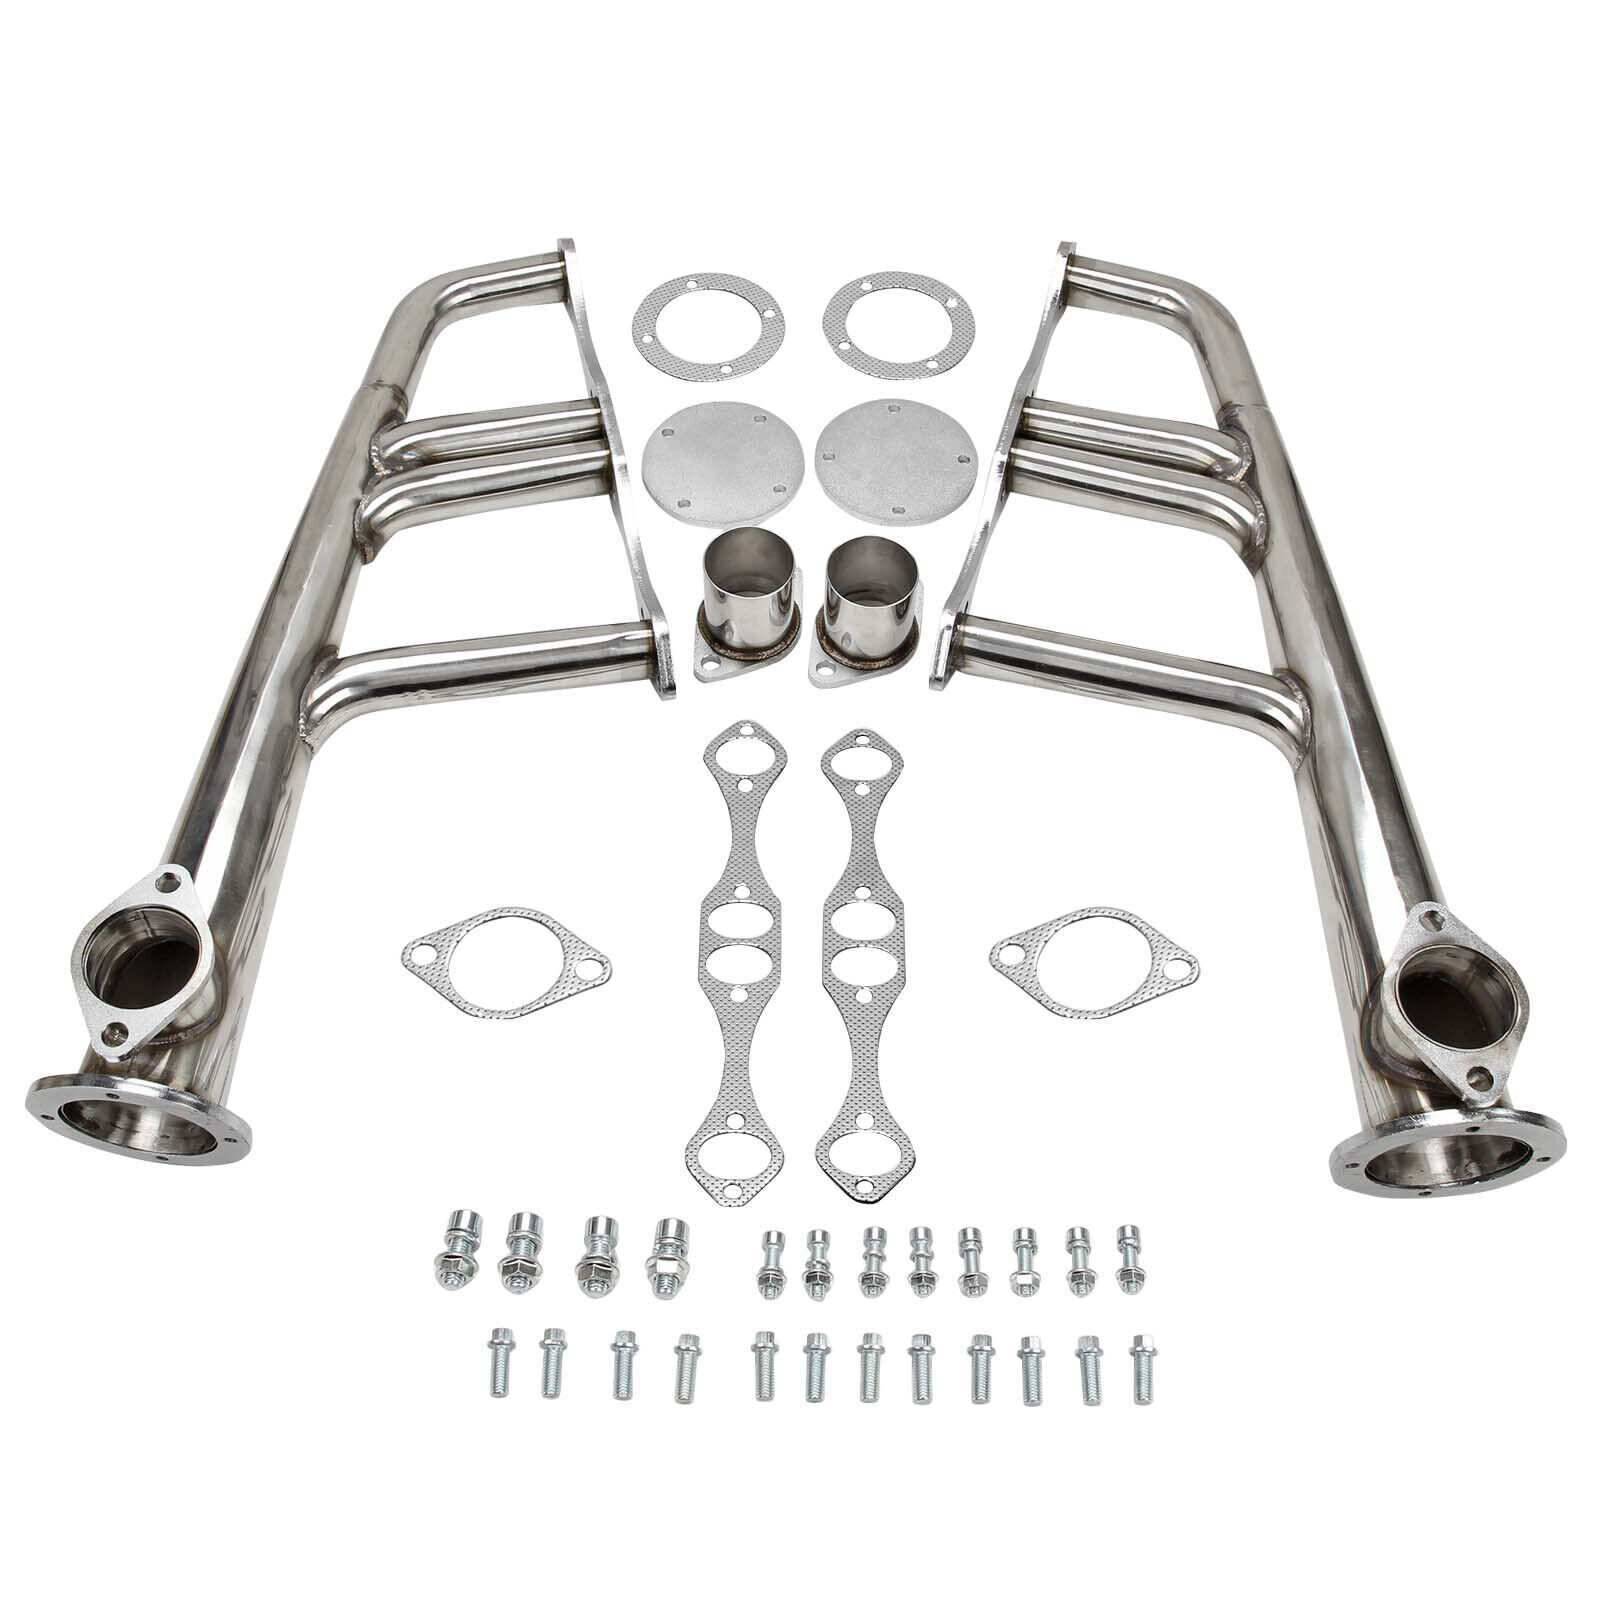 STAINLESS STEEL LAKE STYLE HEADERS For SBC 265-400 V-8 CHEVY,HOT ROD,STREET,RAT